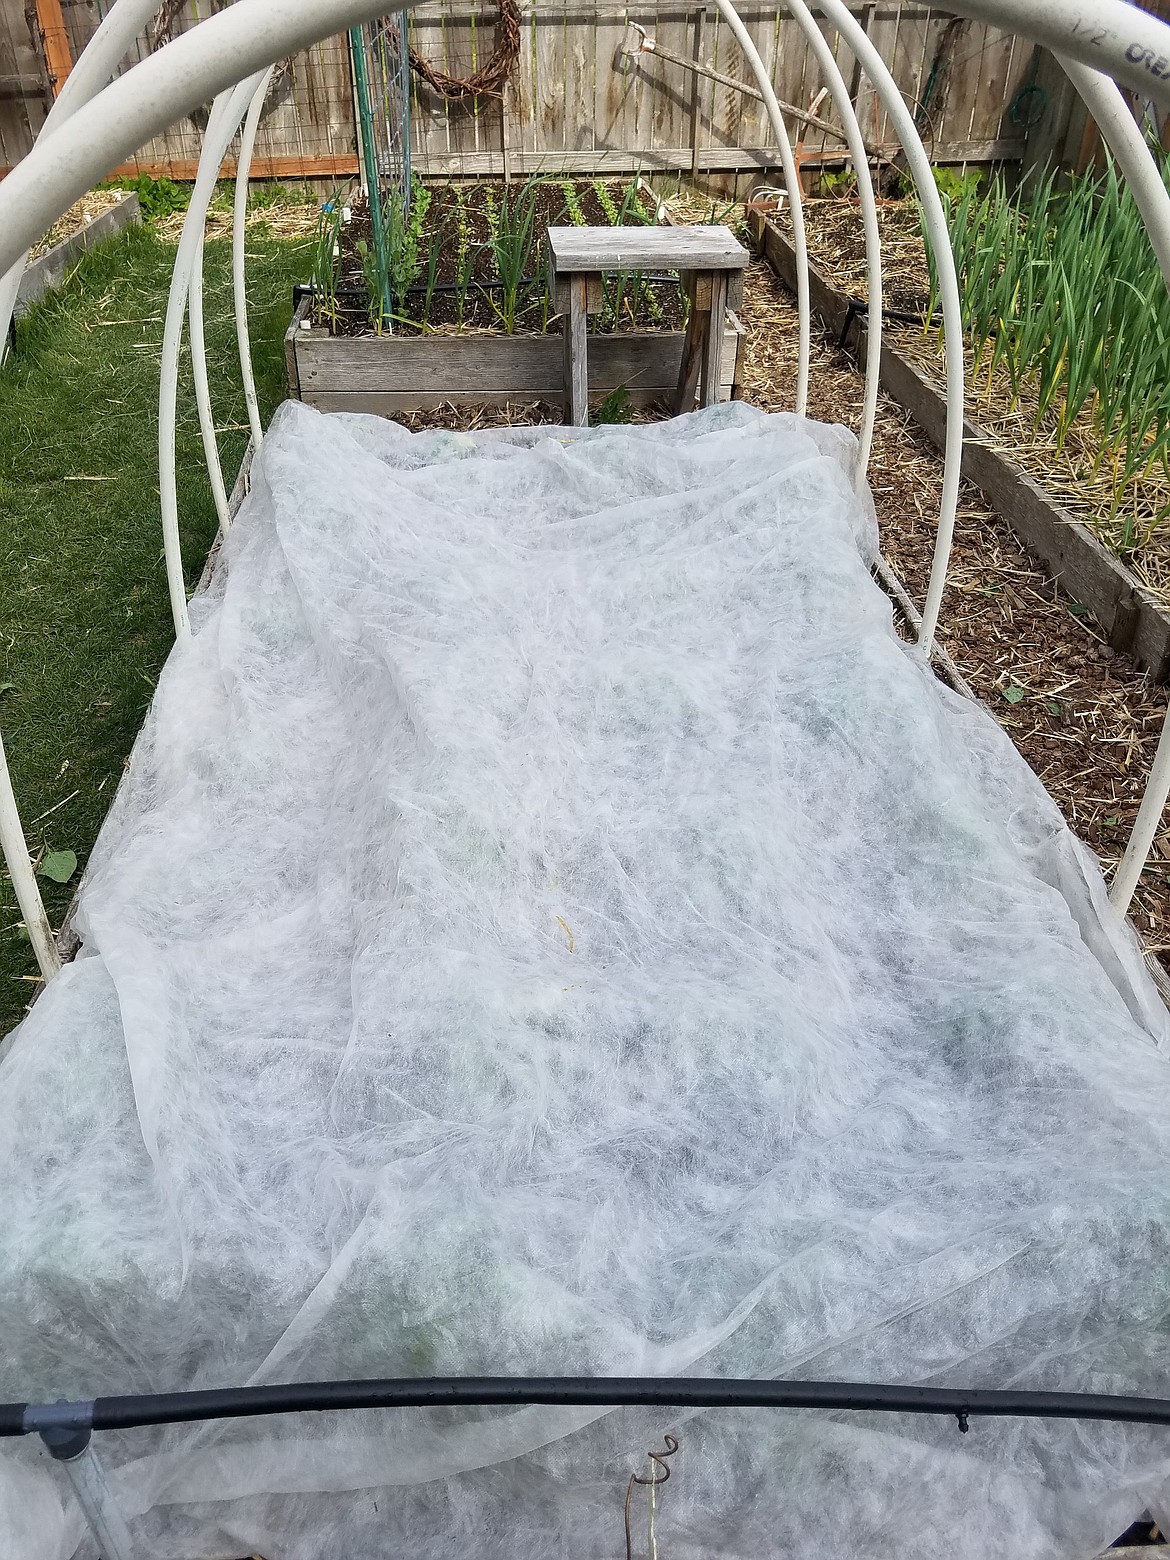 Floating row covers pull double duty protecting your garden from early frosts in the fall and late frosts in the spring.